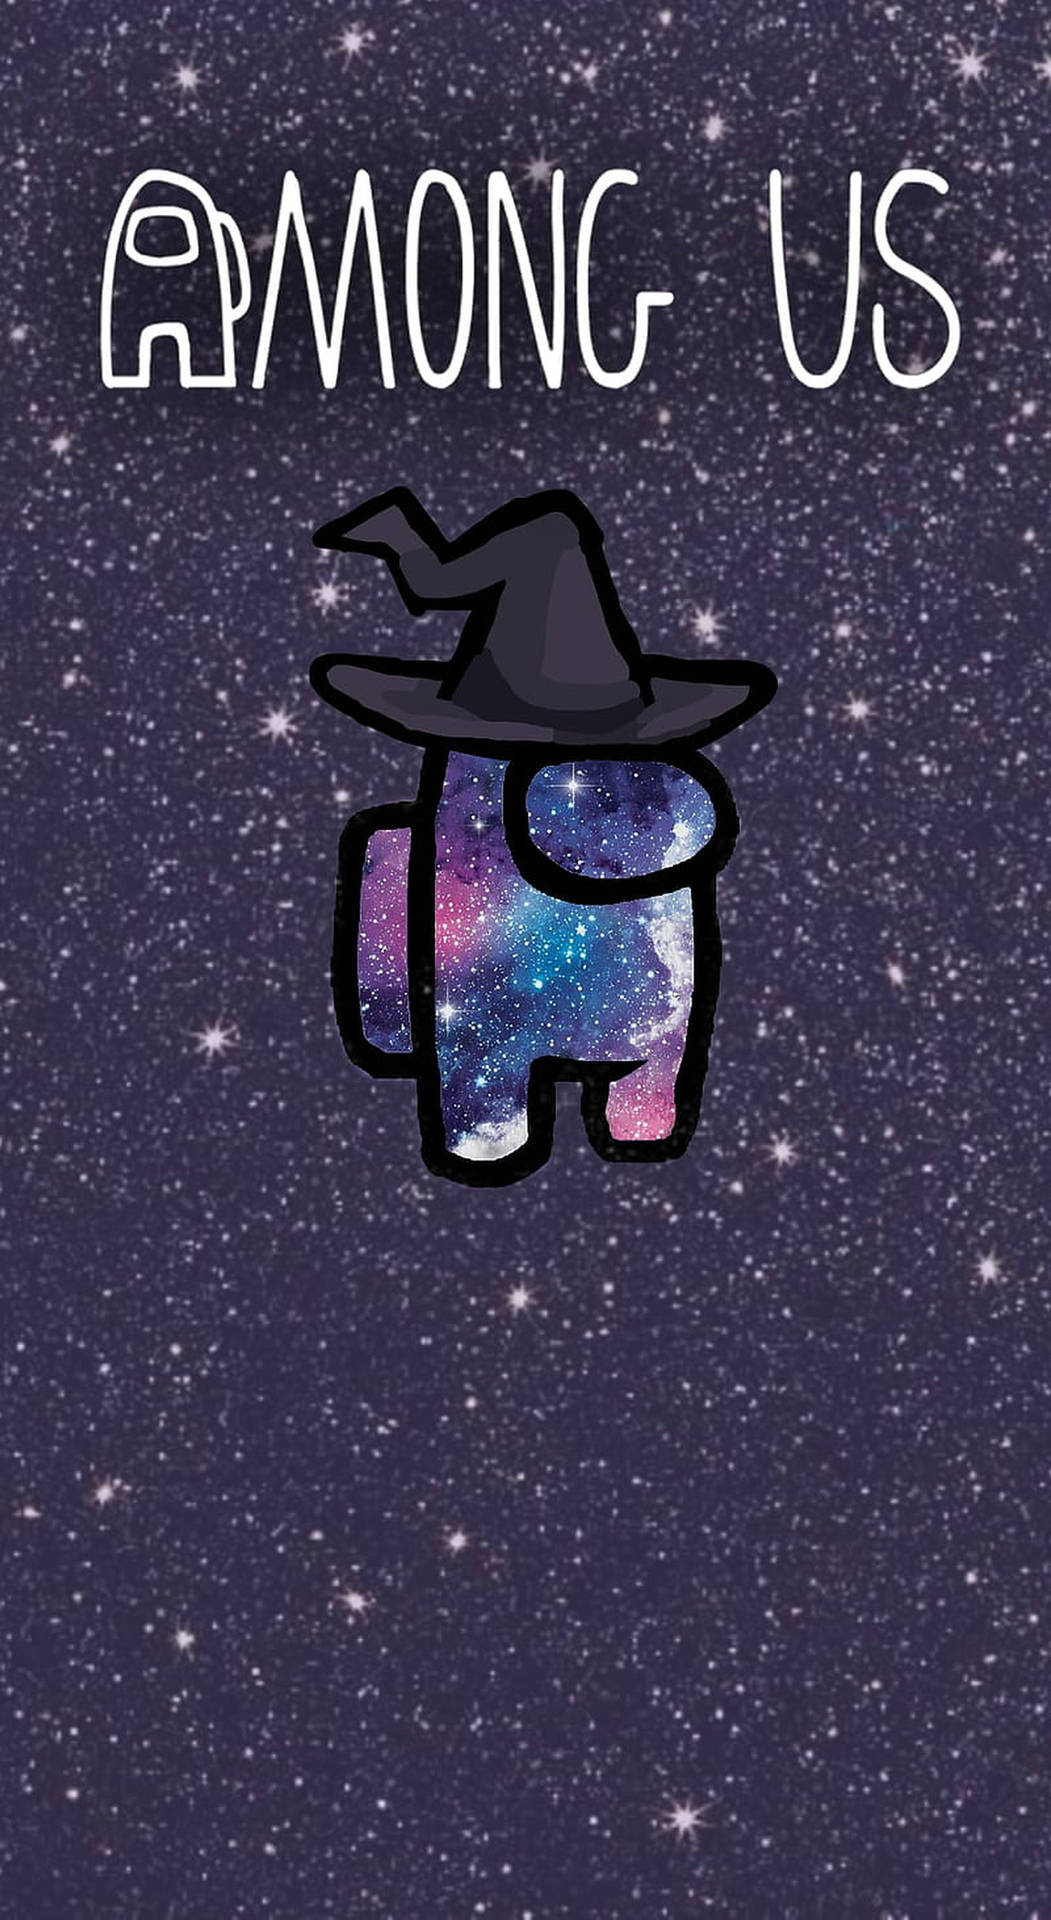 Witch Hat Among Us Space